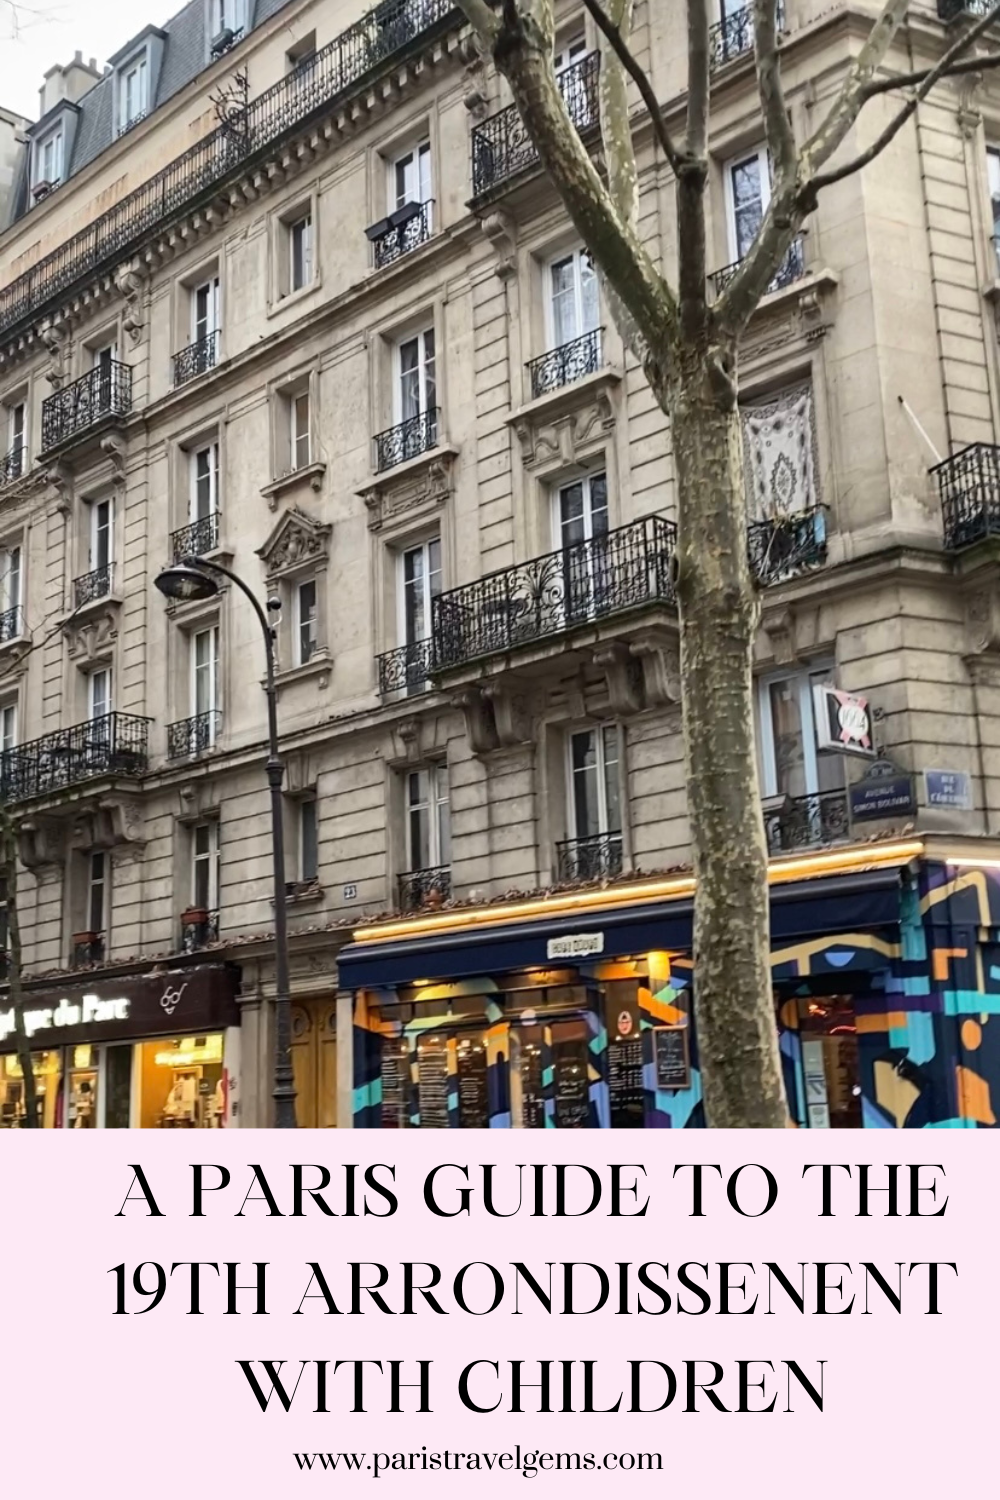 A Paris guide to the 19th arrondissement with children